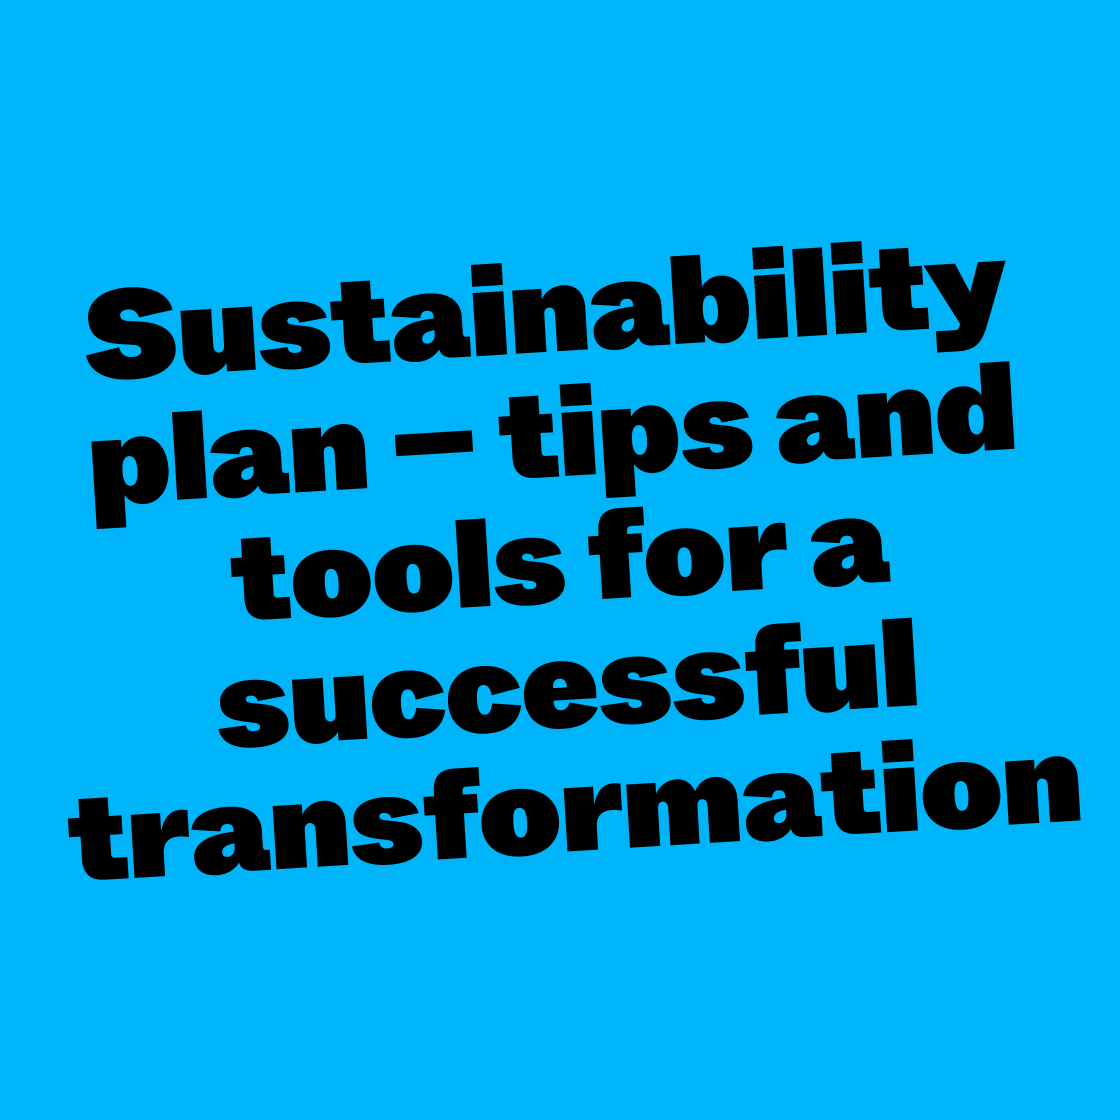 Sustainability plan - tips and tools for a successful transformation